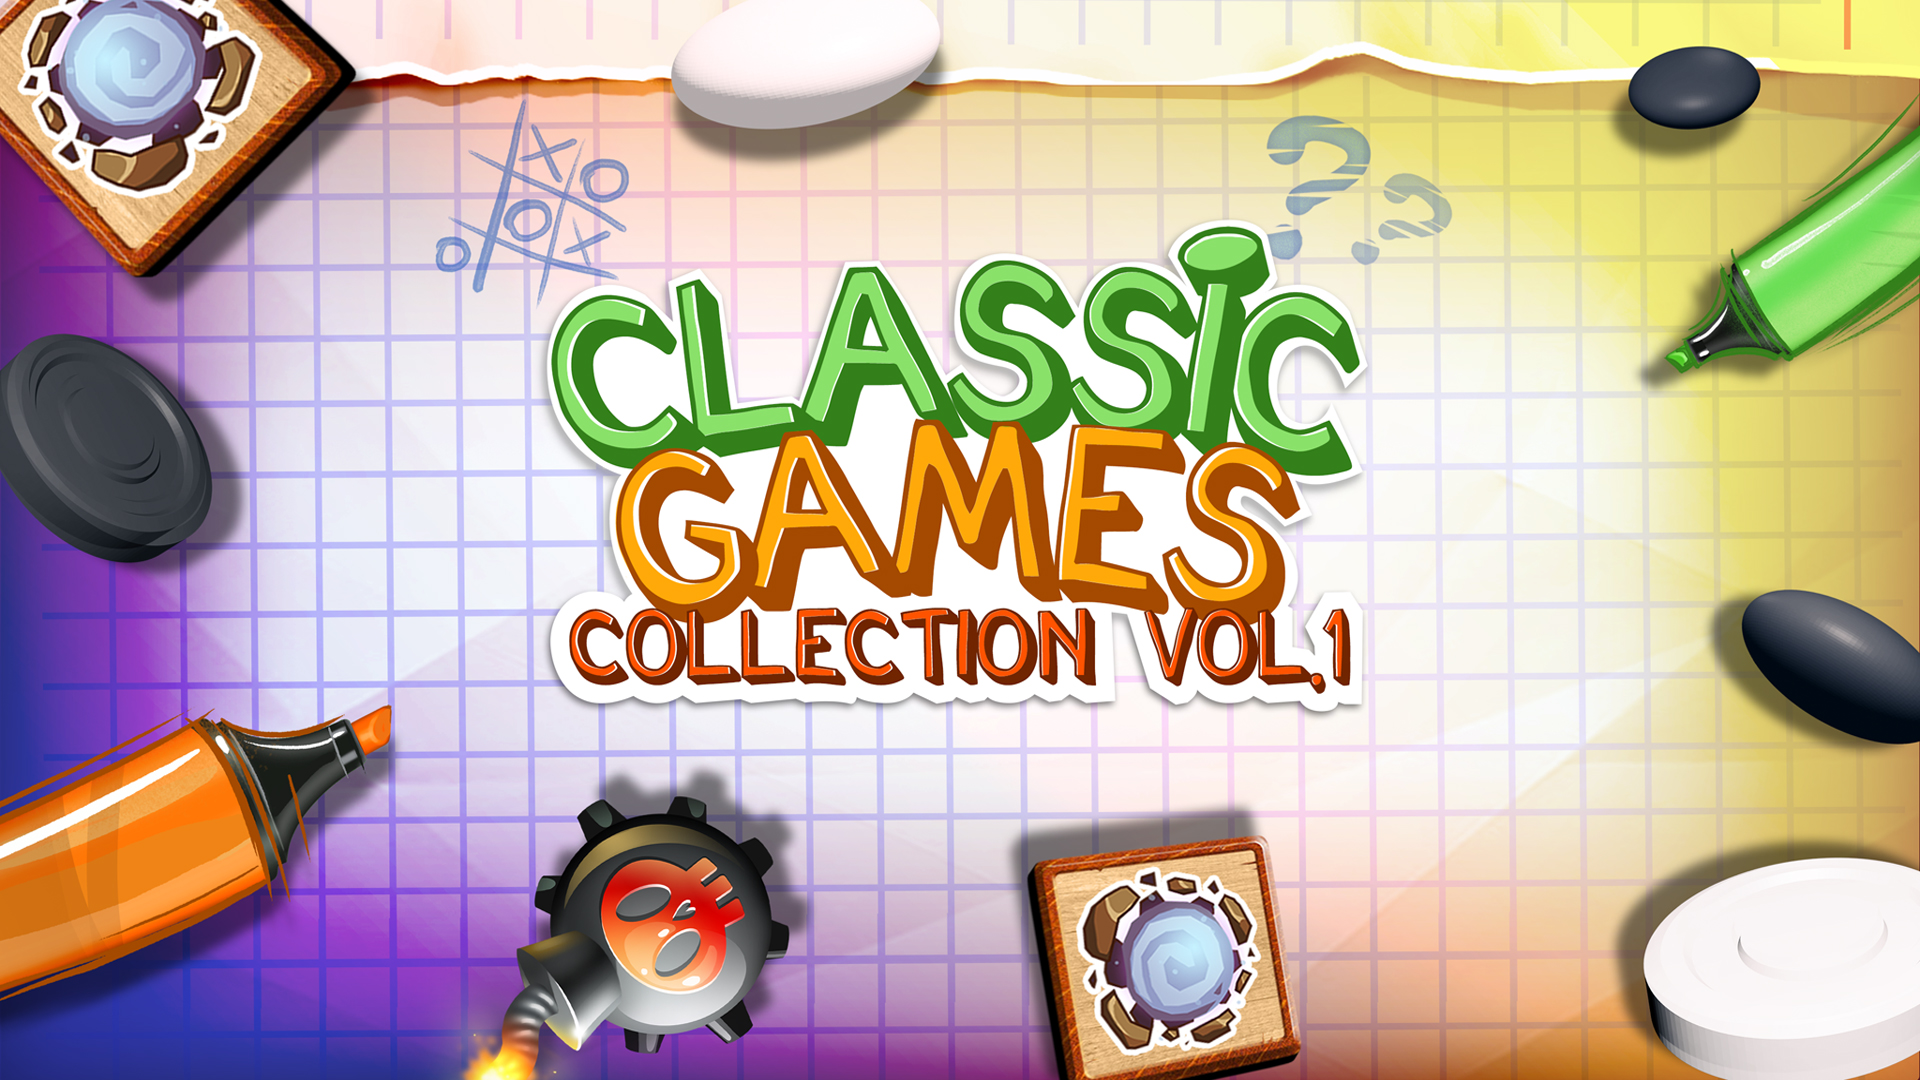 Classic games collection. Classic games collection Vol.1. Classic games collection Nintendo Switch. First class game.